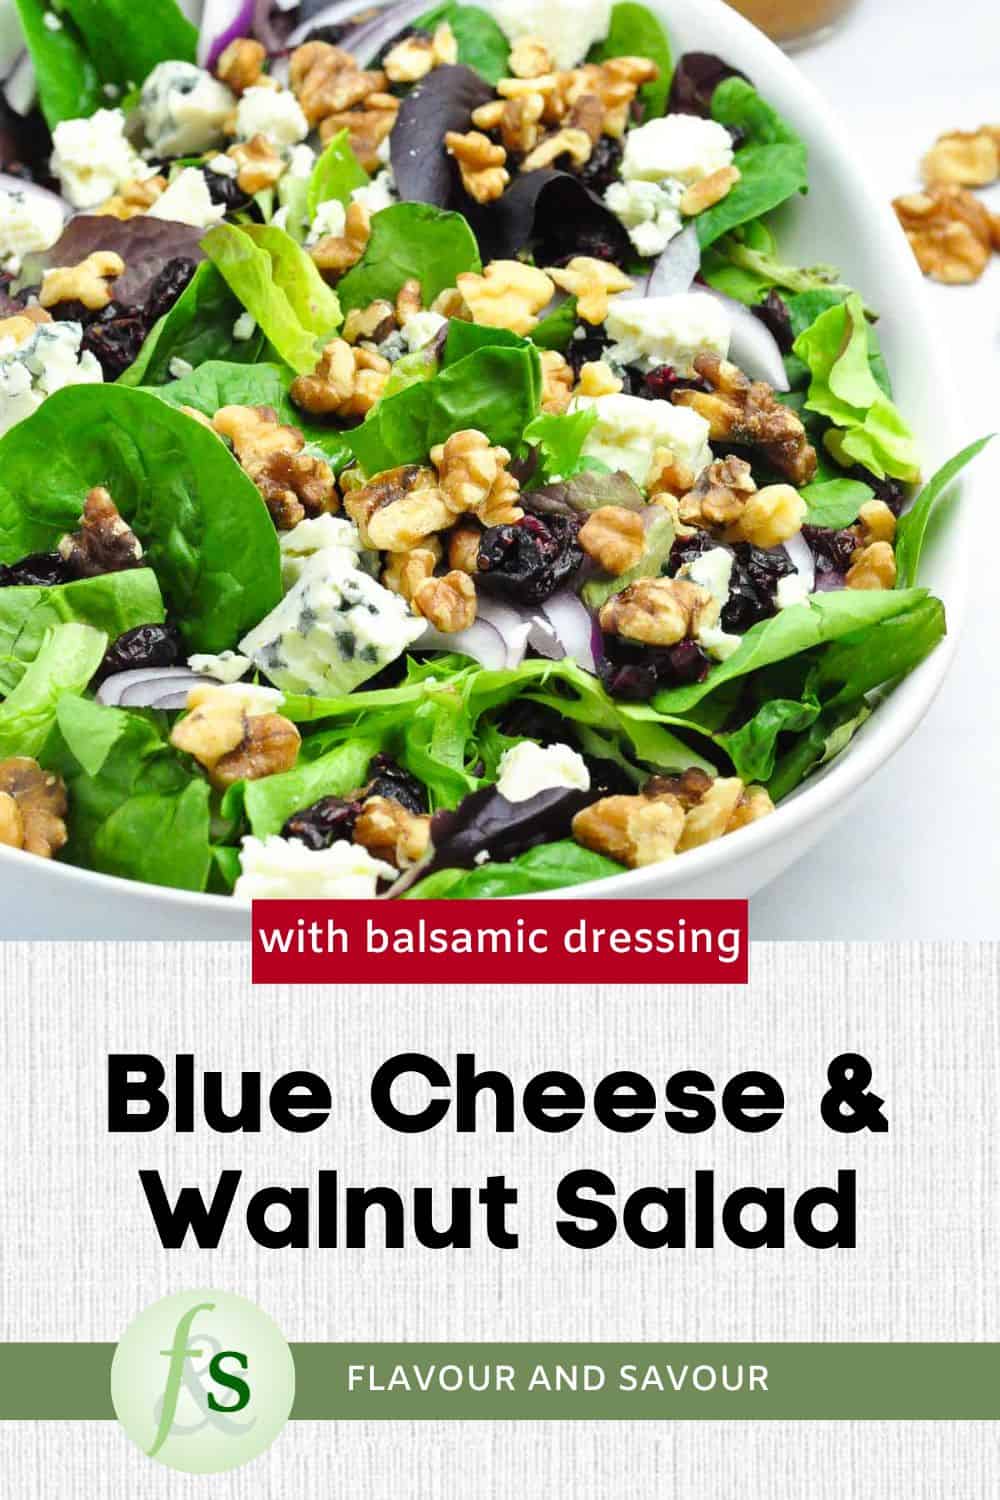 Image with text for Blue Cheese and Walnut Salad with balsamic dressing.